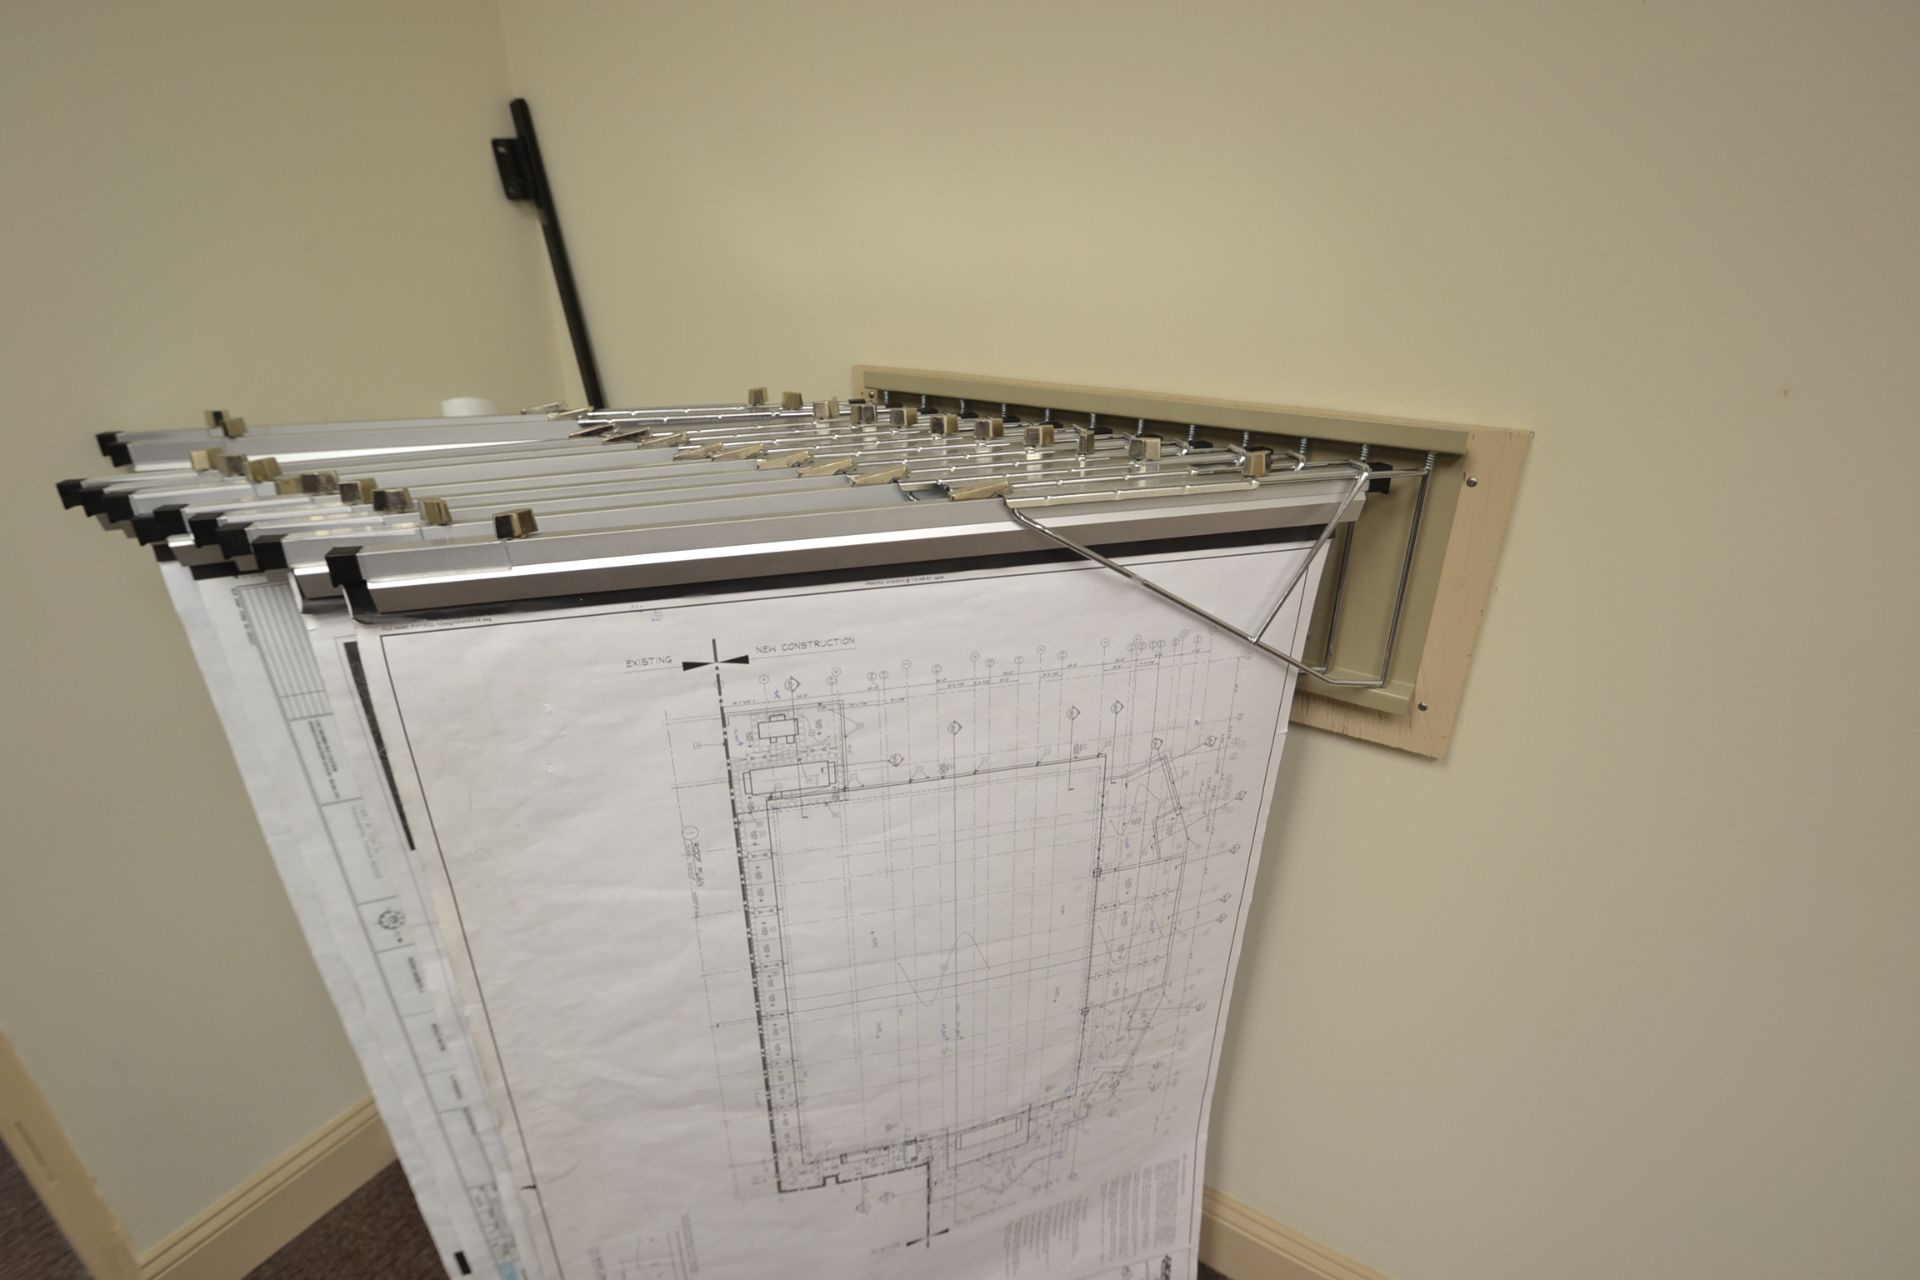 DRAFTING TABLE, CORT, 5'X38", W/ CHAIR AND BLUE PRINT HANGER - Image 2 of 2